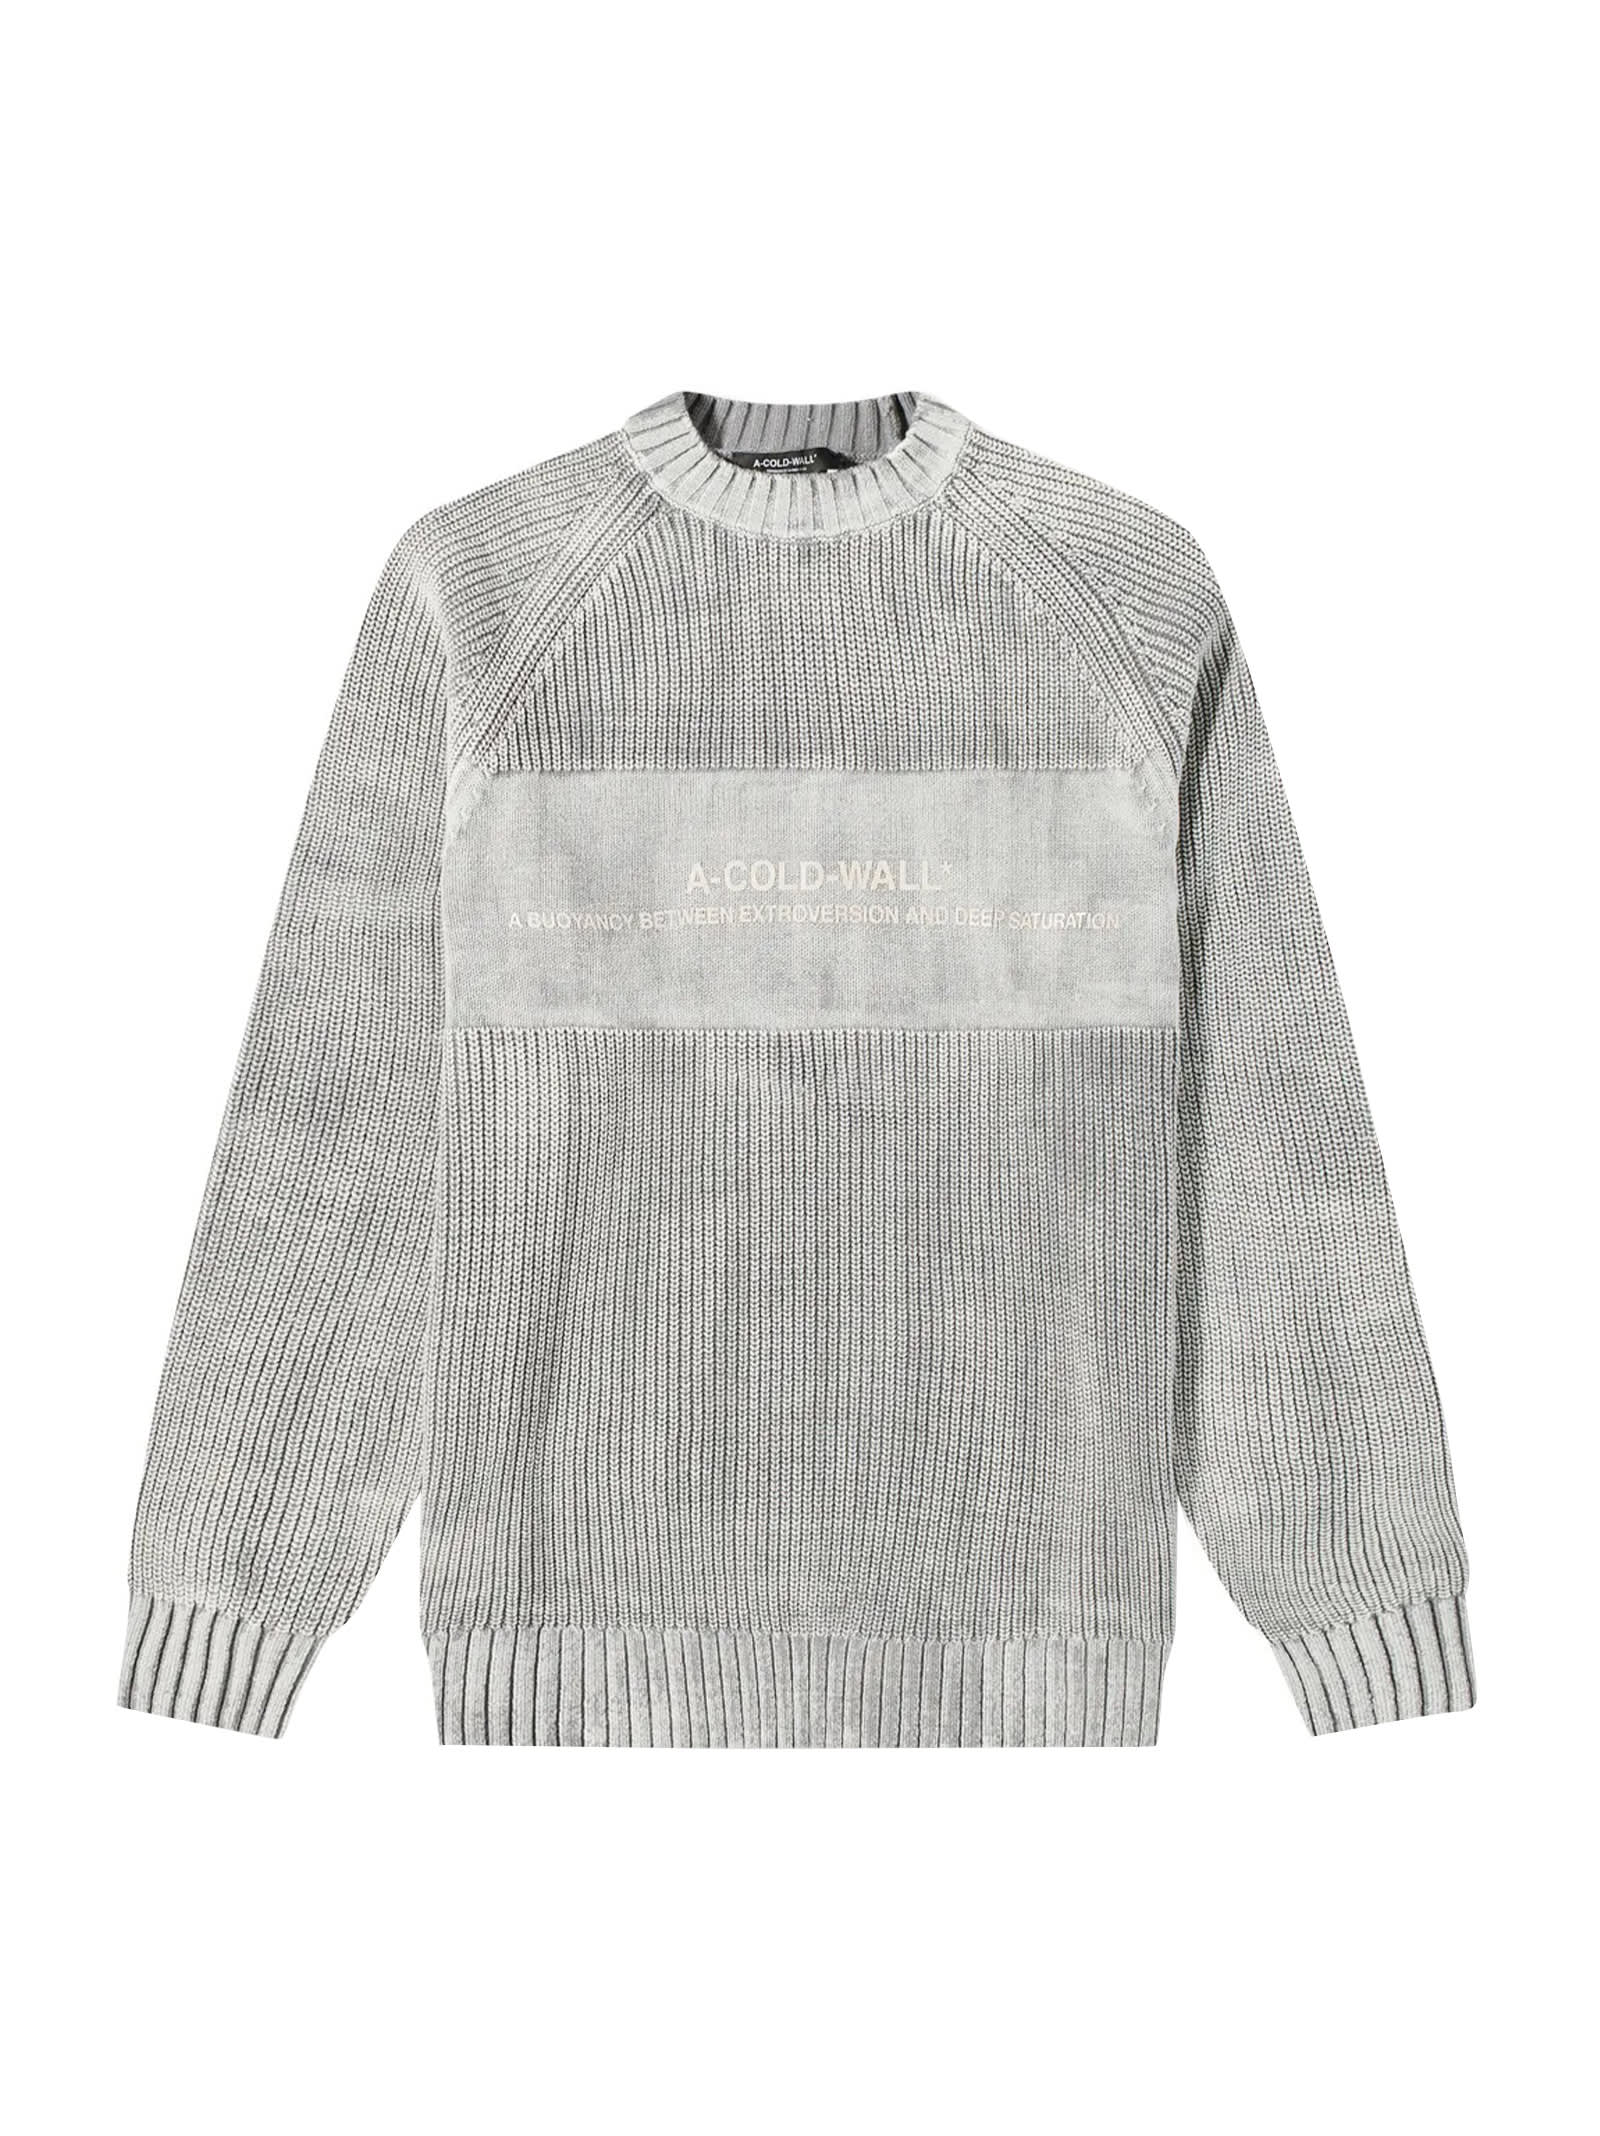 A-COLD-WALL Cotton Blend Sweater